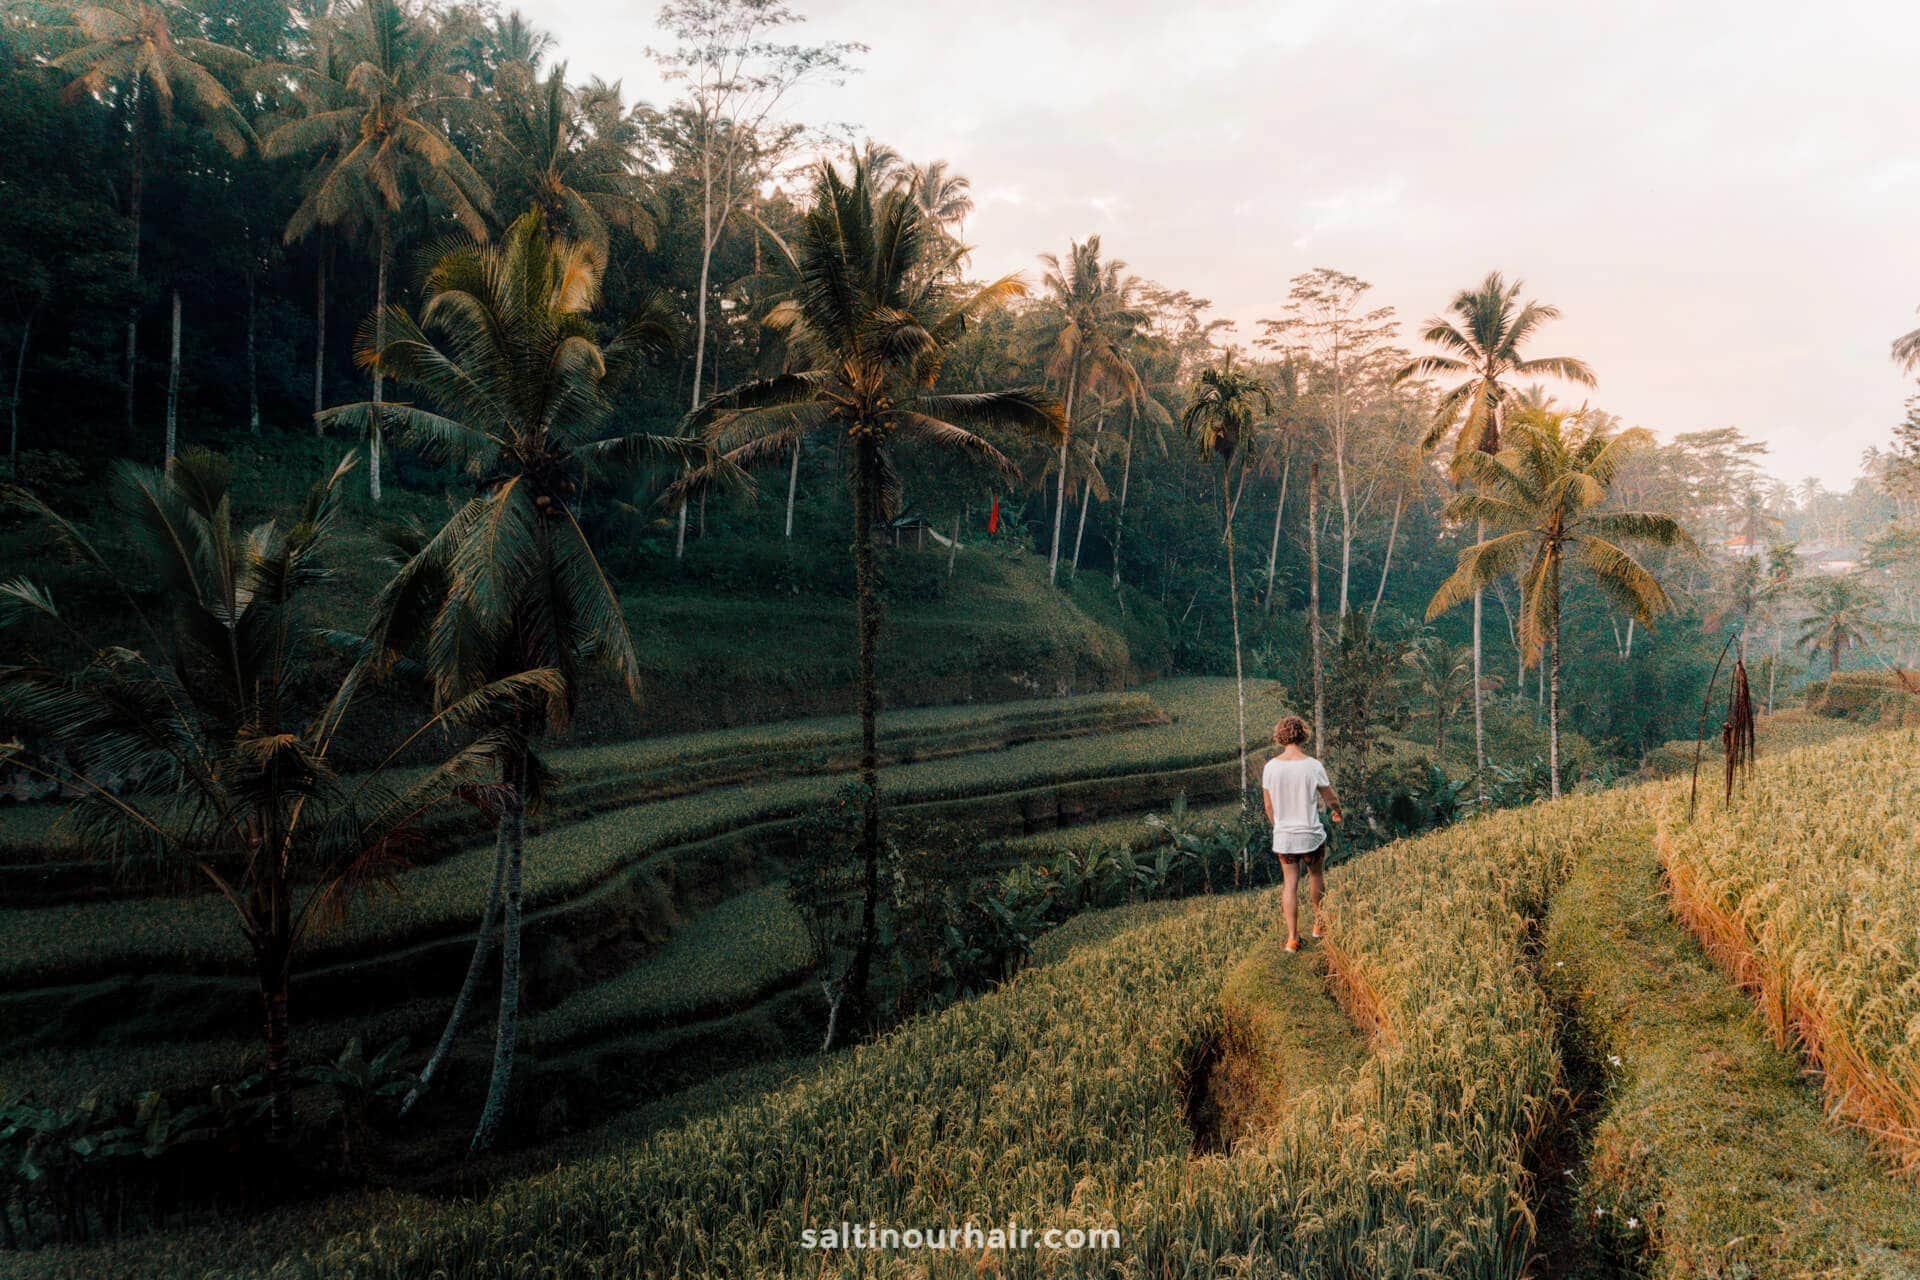  Tegalalang  Rice Terraces around Ubud  in Bali The 